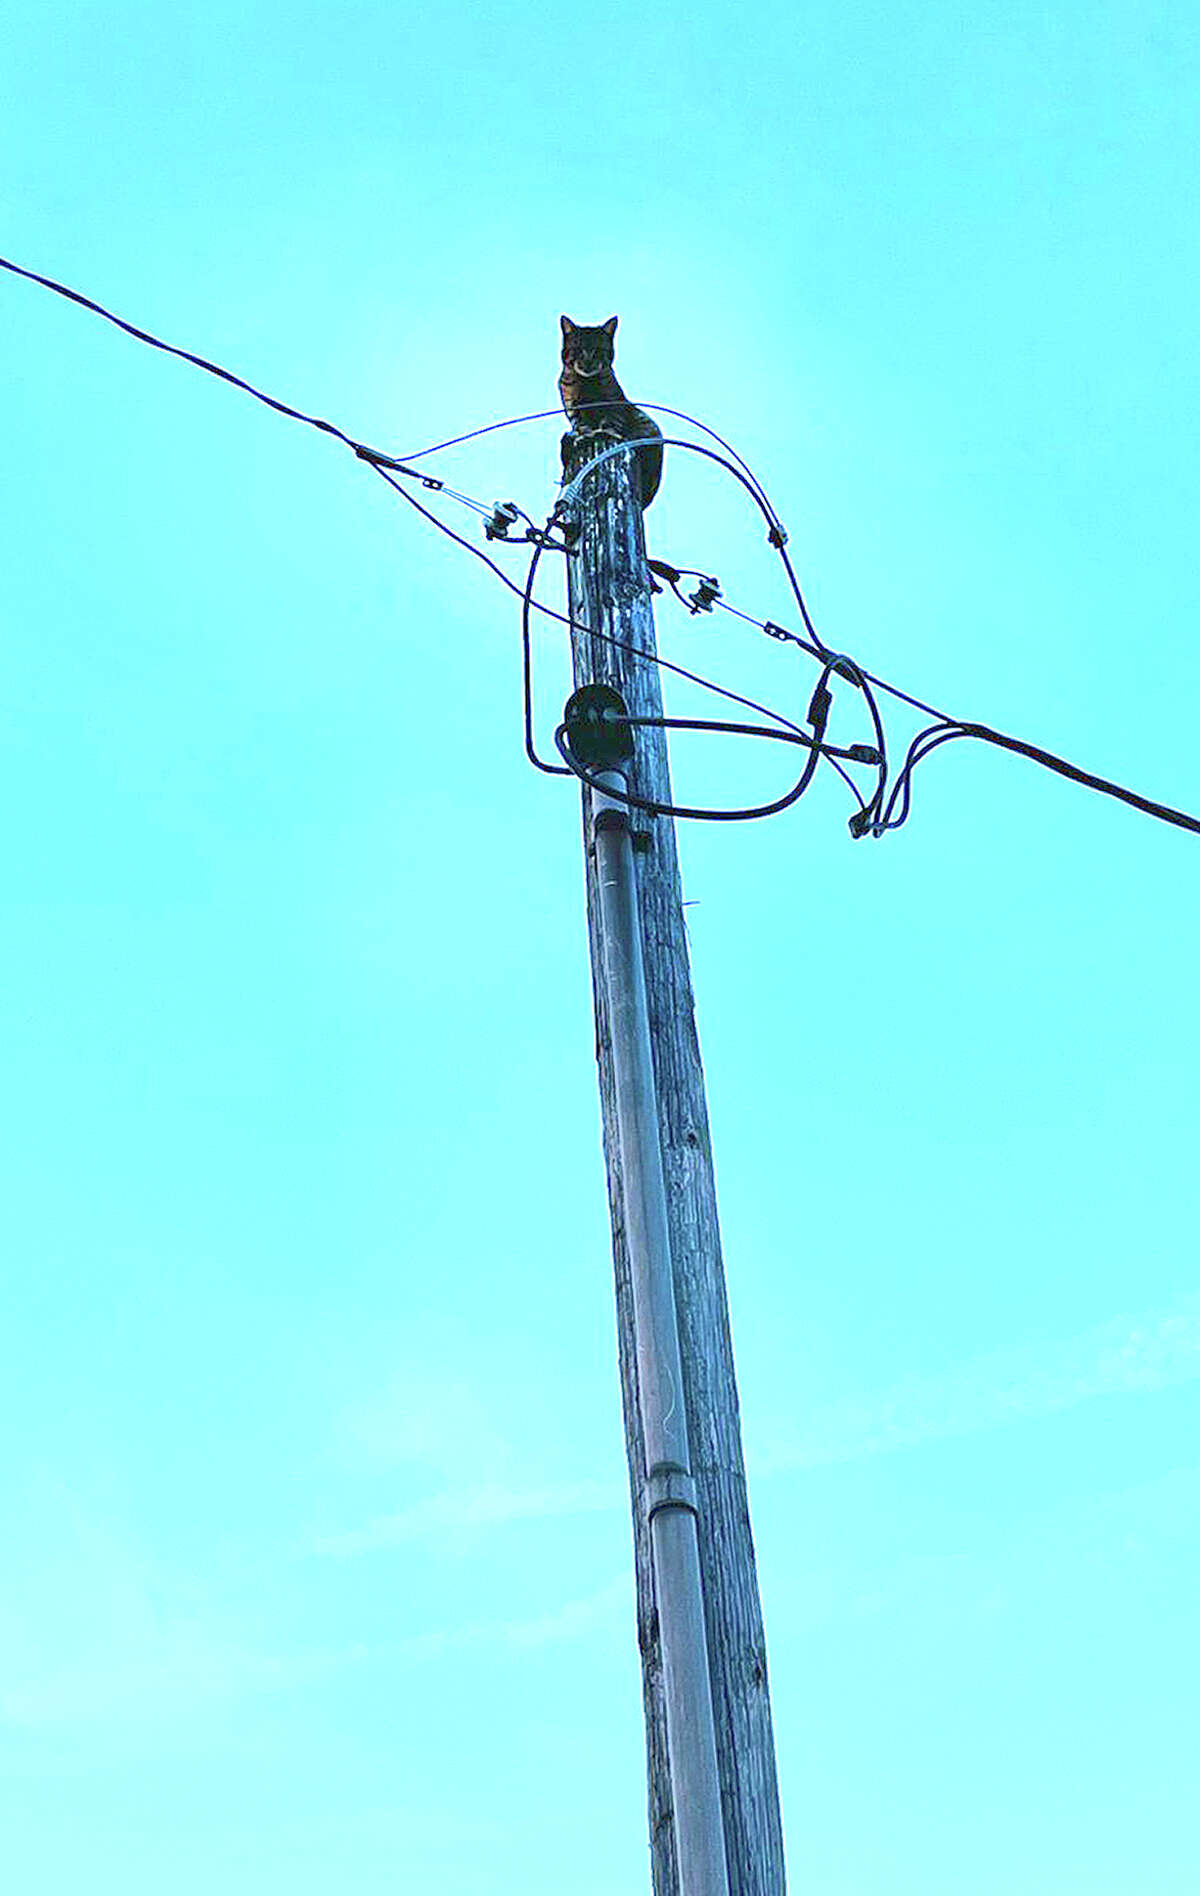 A cat sits on top of a utility pole in Morgan County. The fearless feline scurried up the pole with a dog giving chase. The canine eventually went away and the cat made its way safely back down the tall timber.